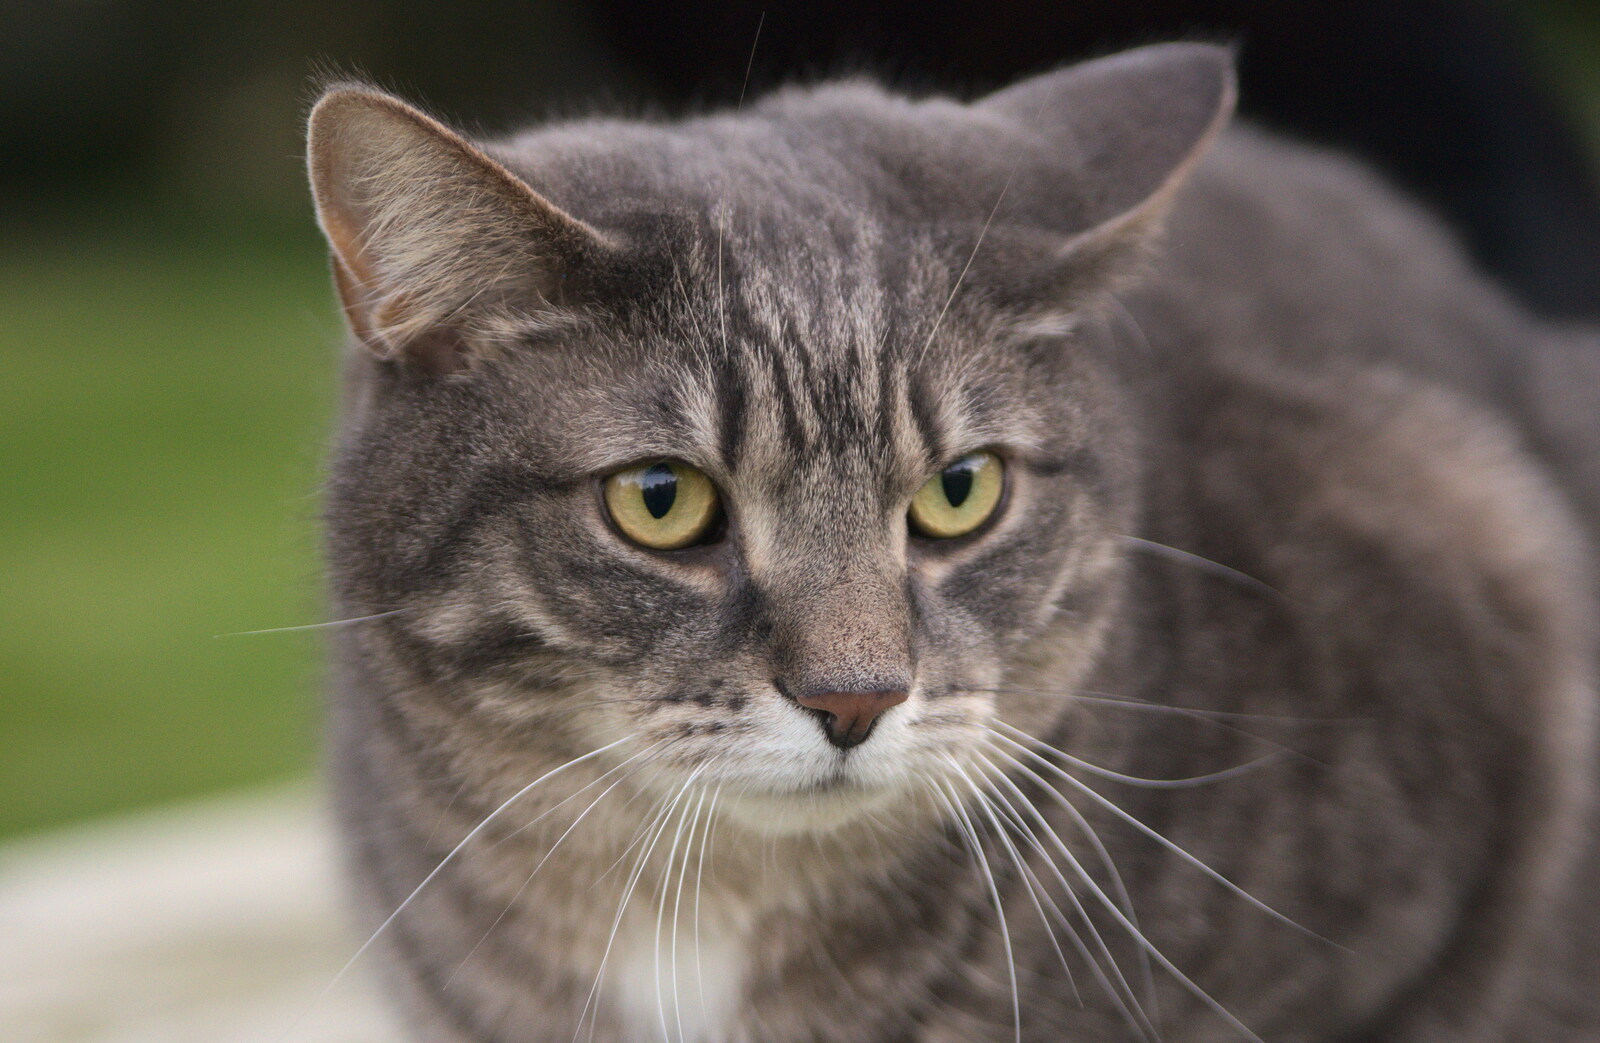 Boris - stripey cat from Emily Comes to Visit, Brome, Suffolk - 15th March 2014